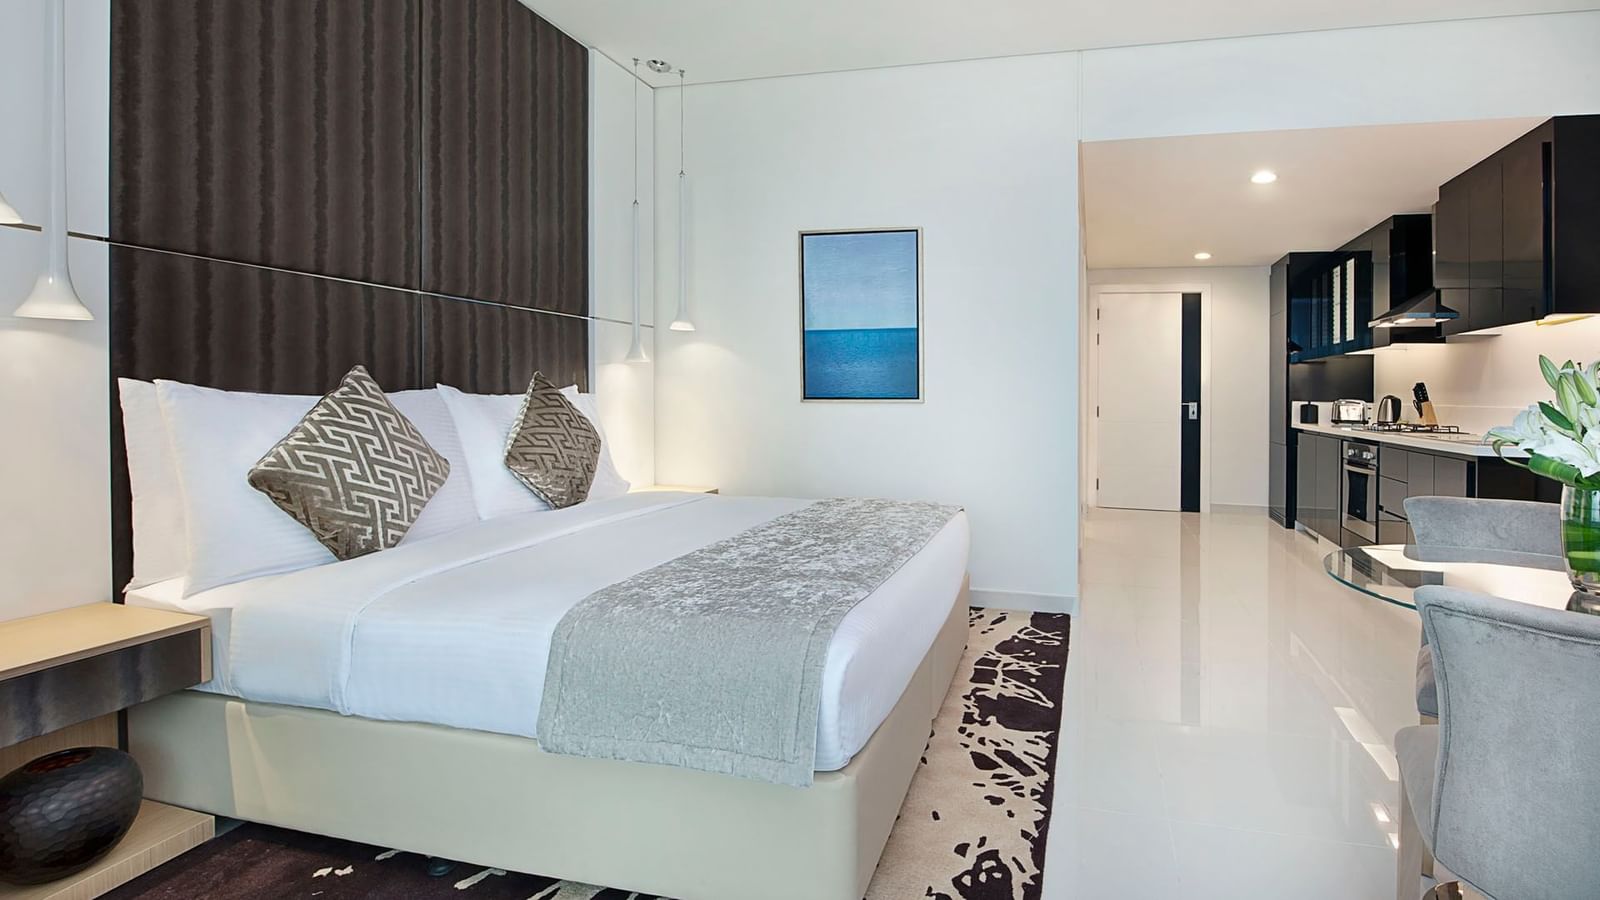 King-sized bed and fully equipped kitchen in Deluxe Room at DAMAC Maison Canal Views